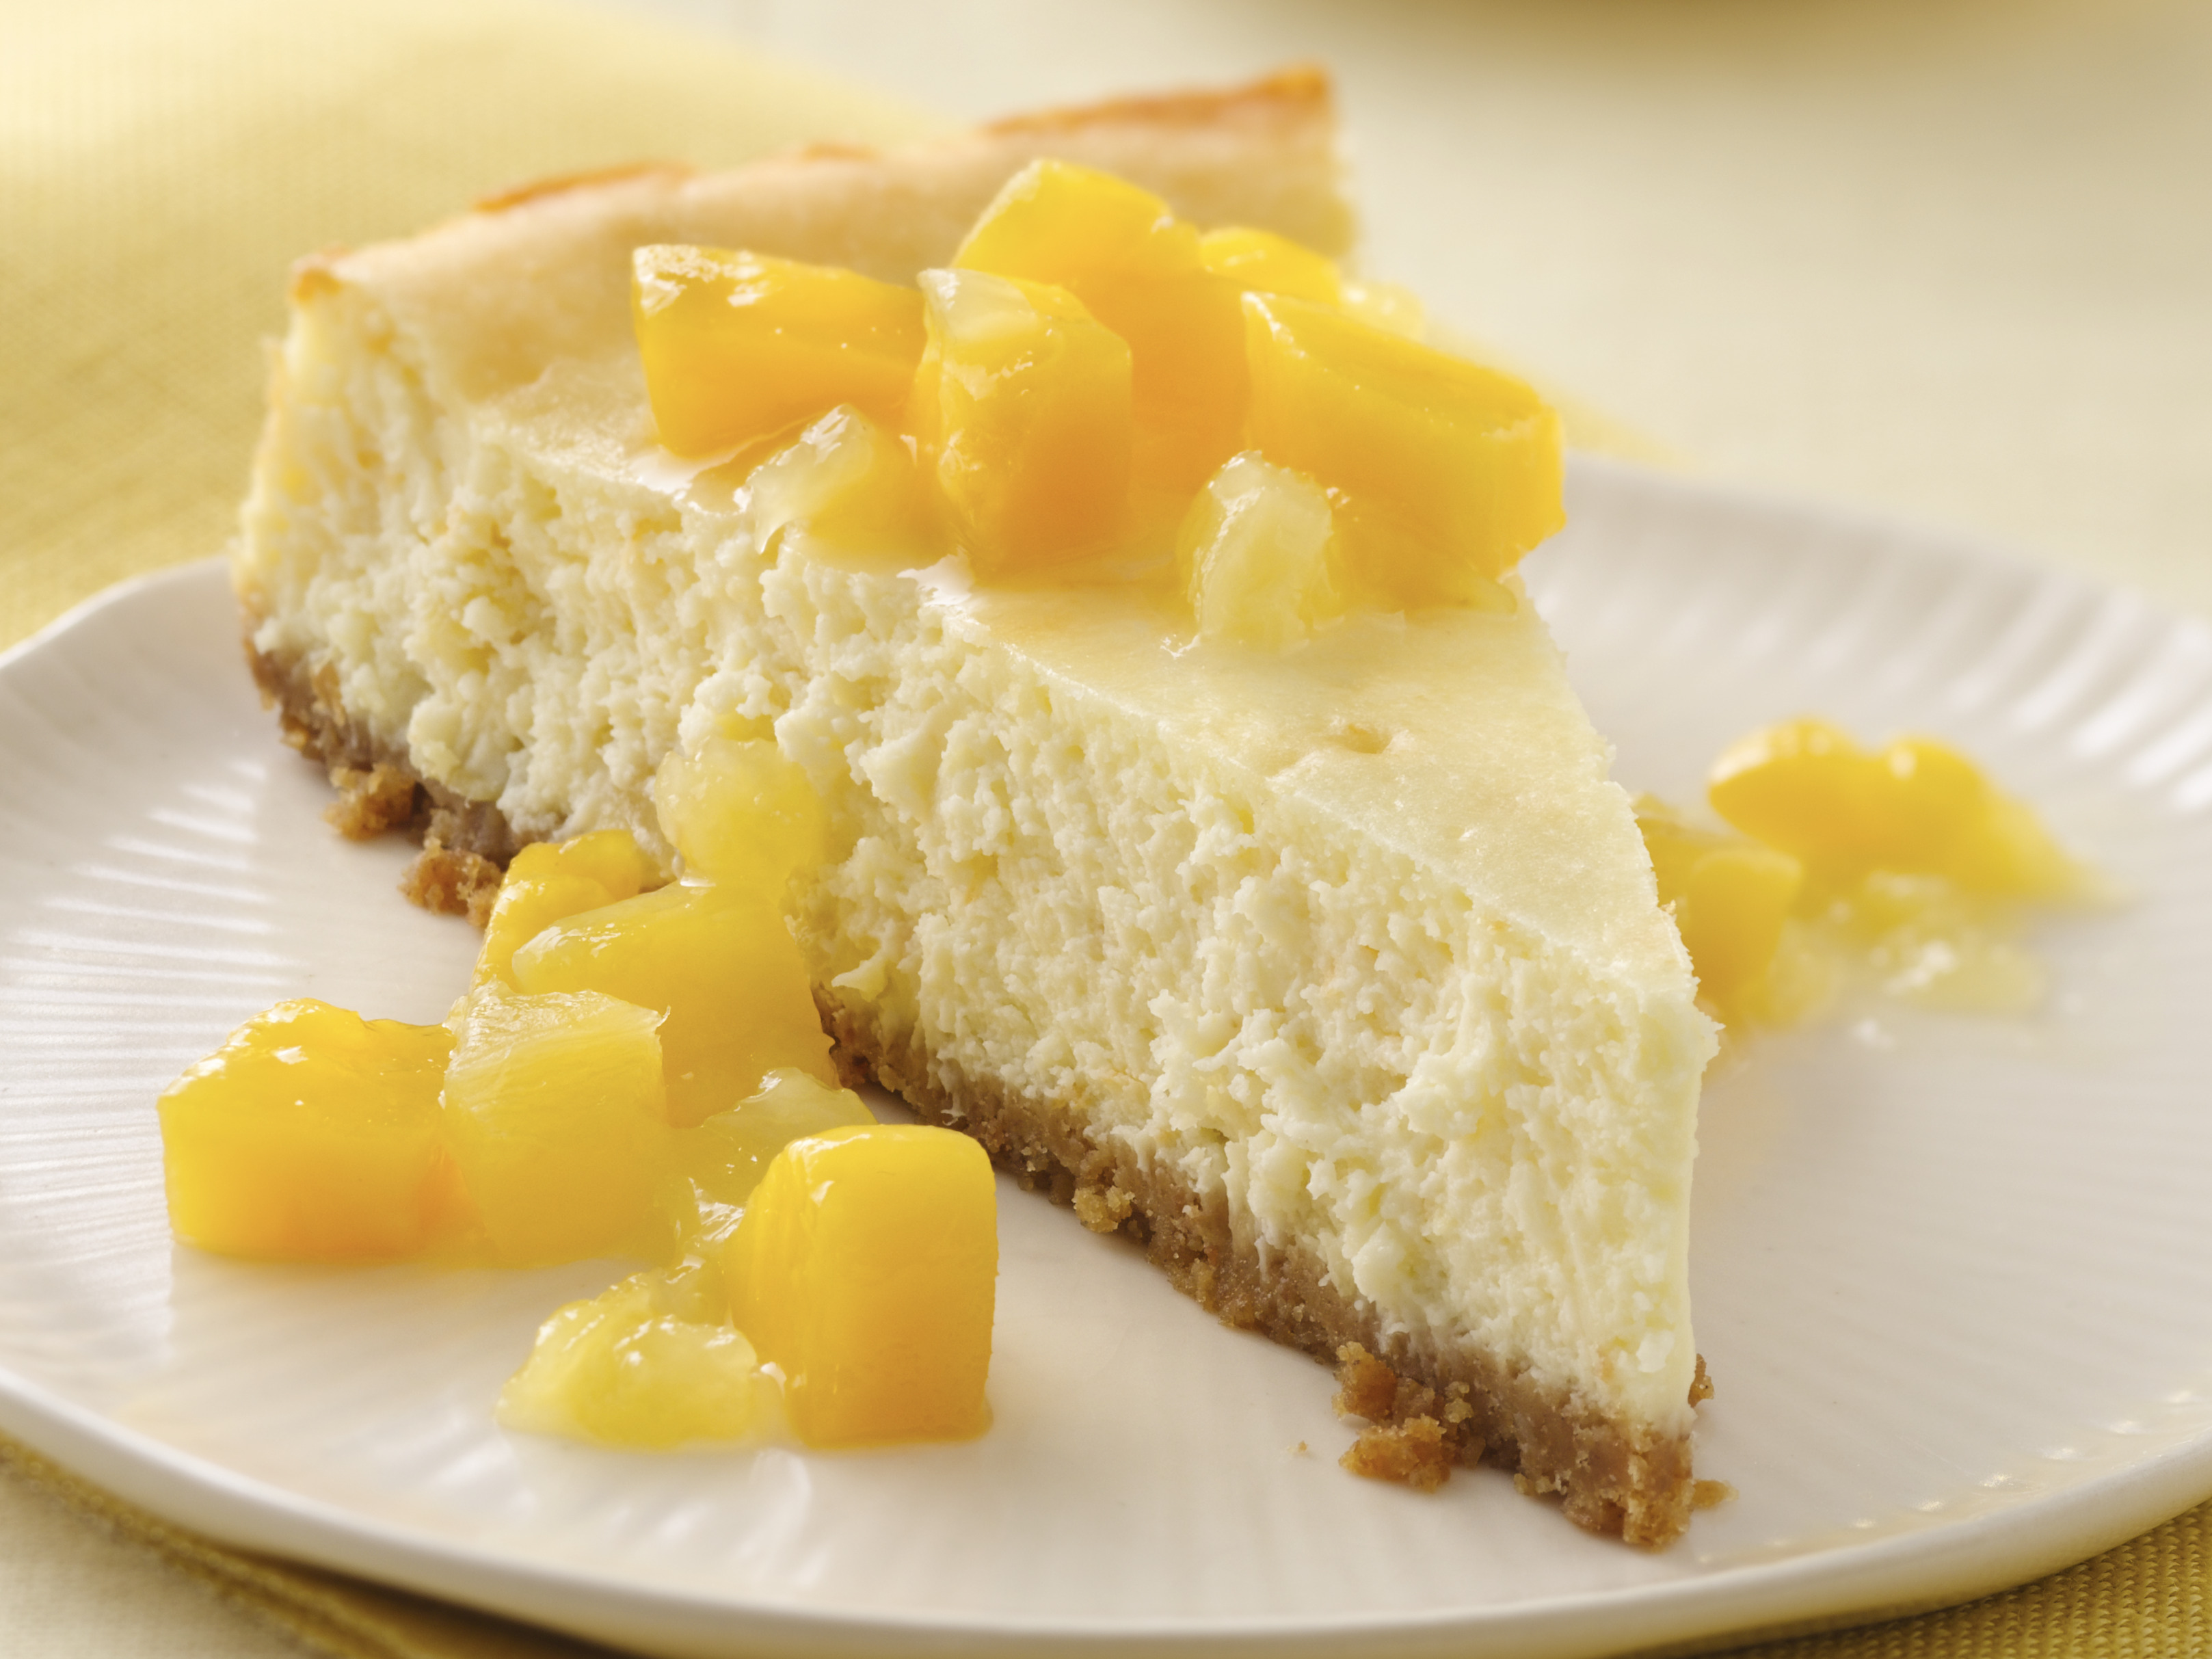 Pineapple Paradise Layer Cake - Love and Confections